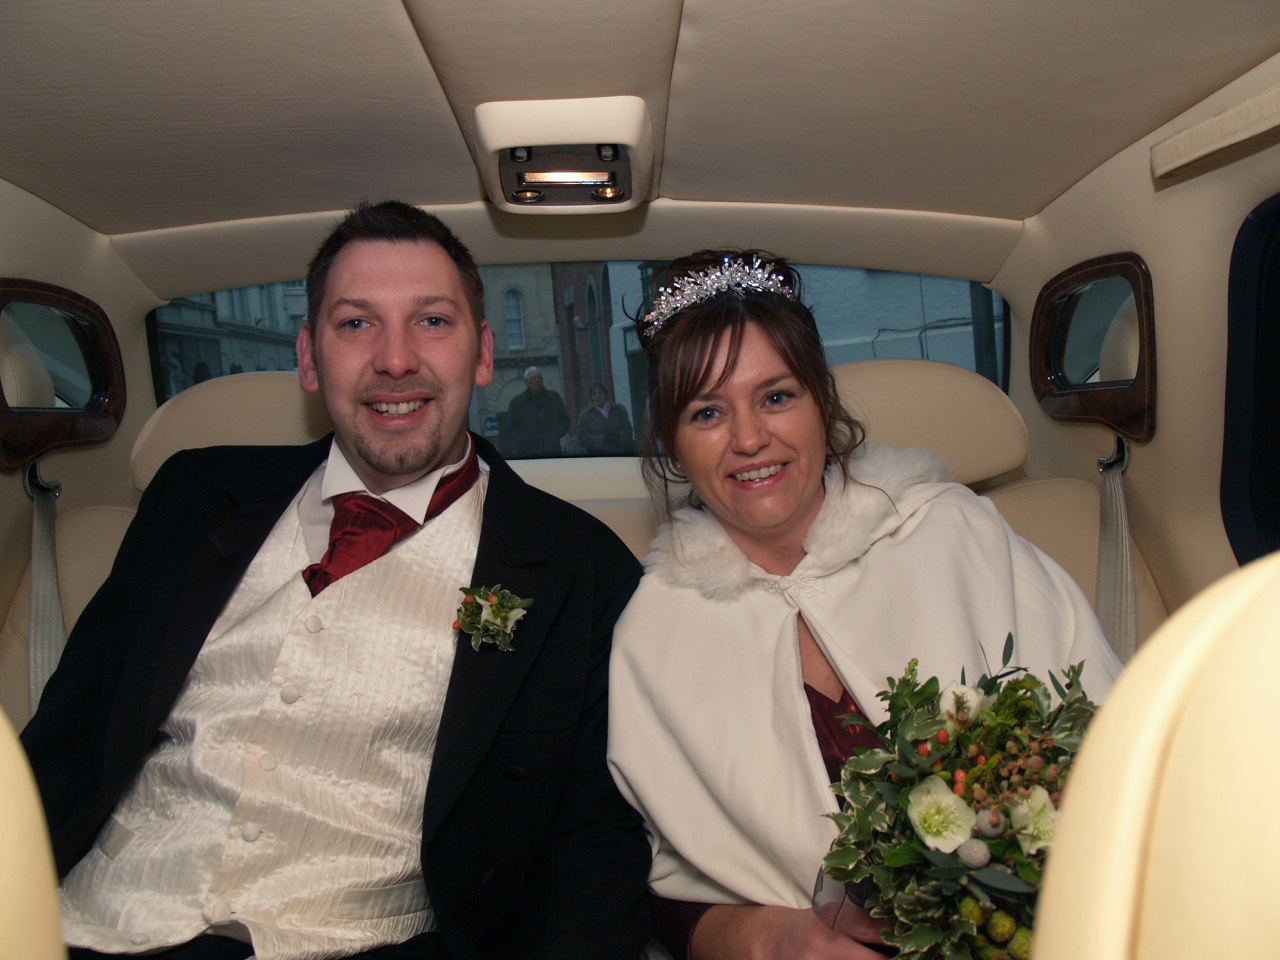 A newly married couple in the wedding car